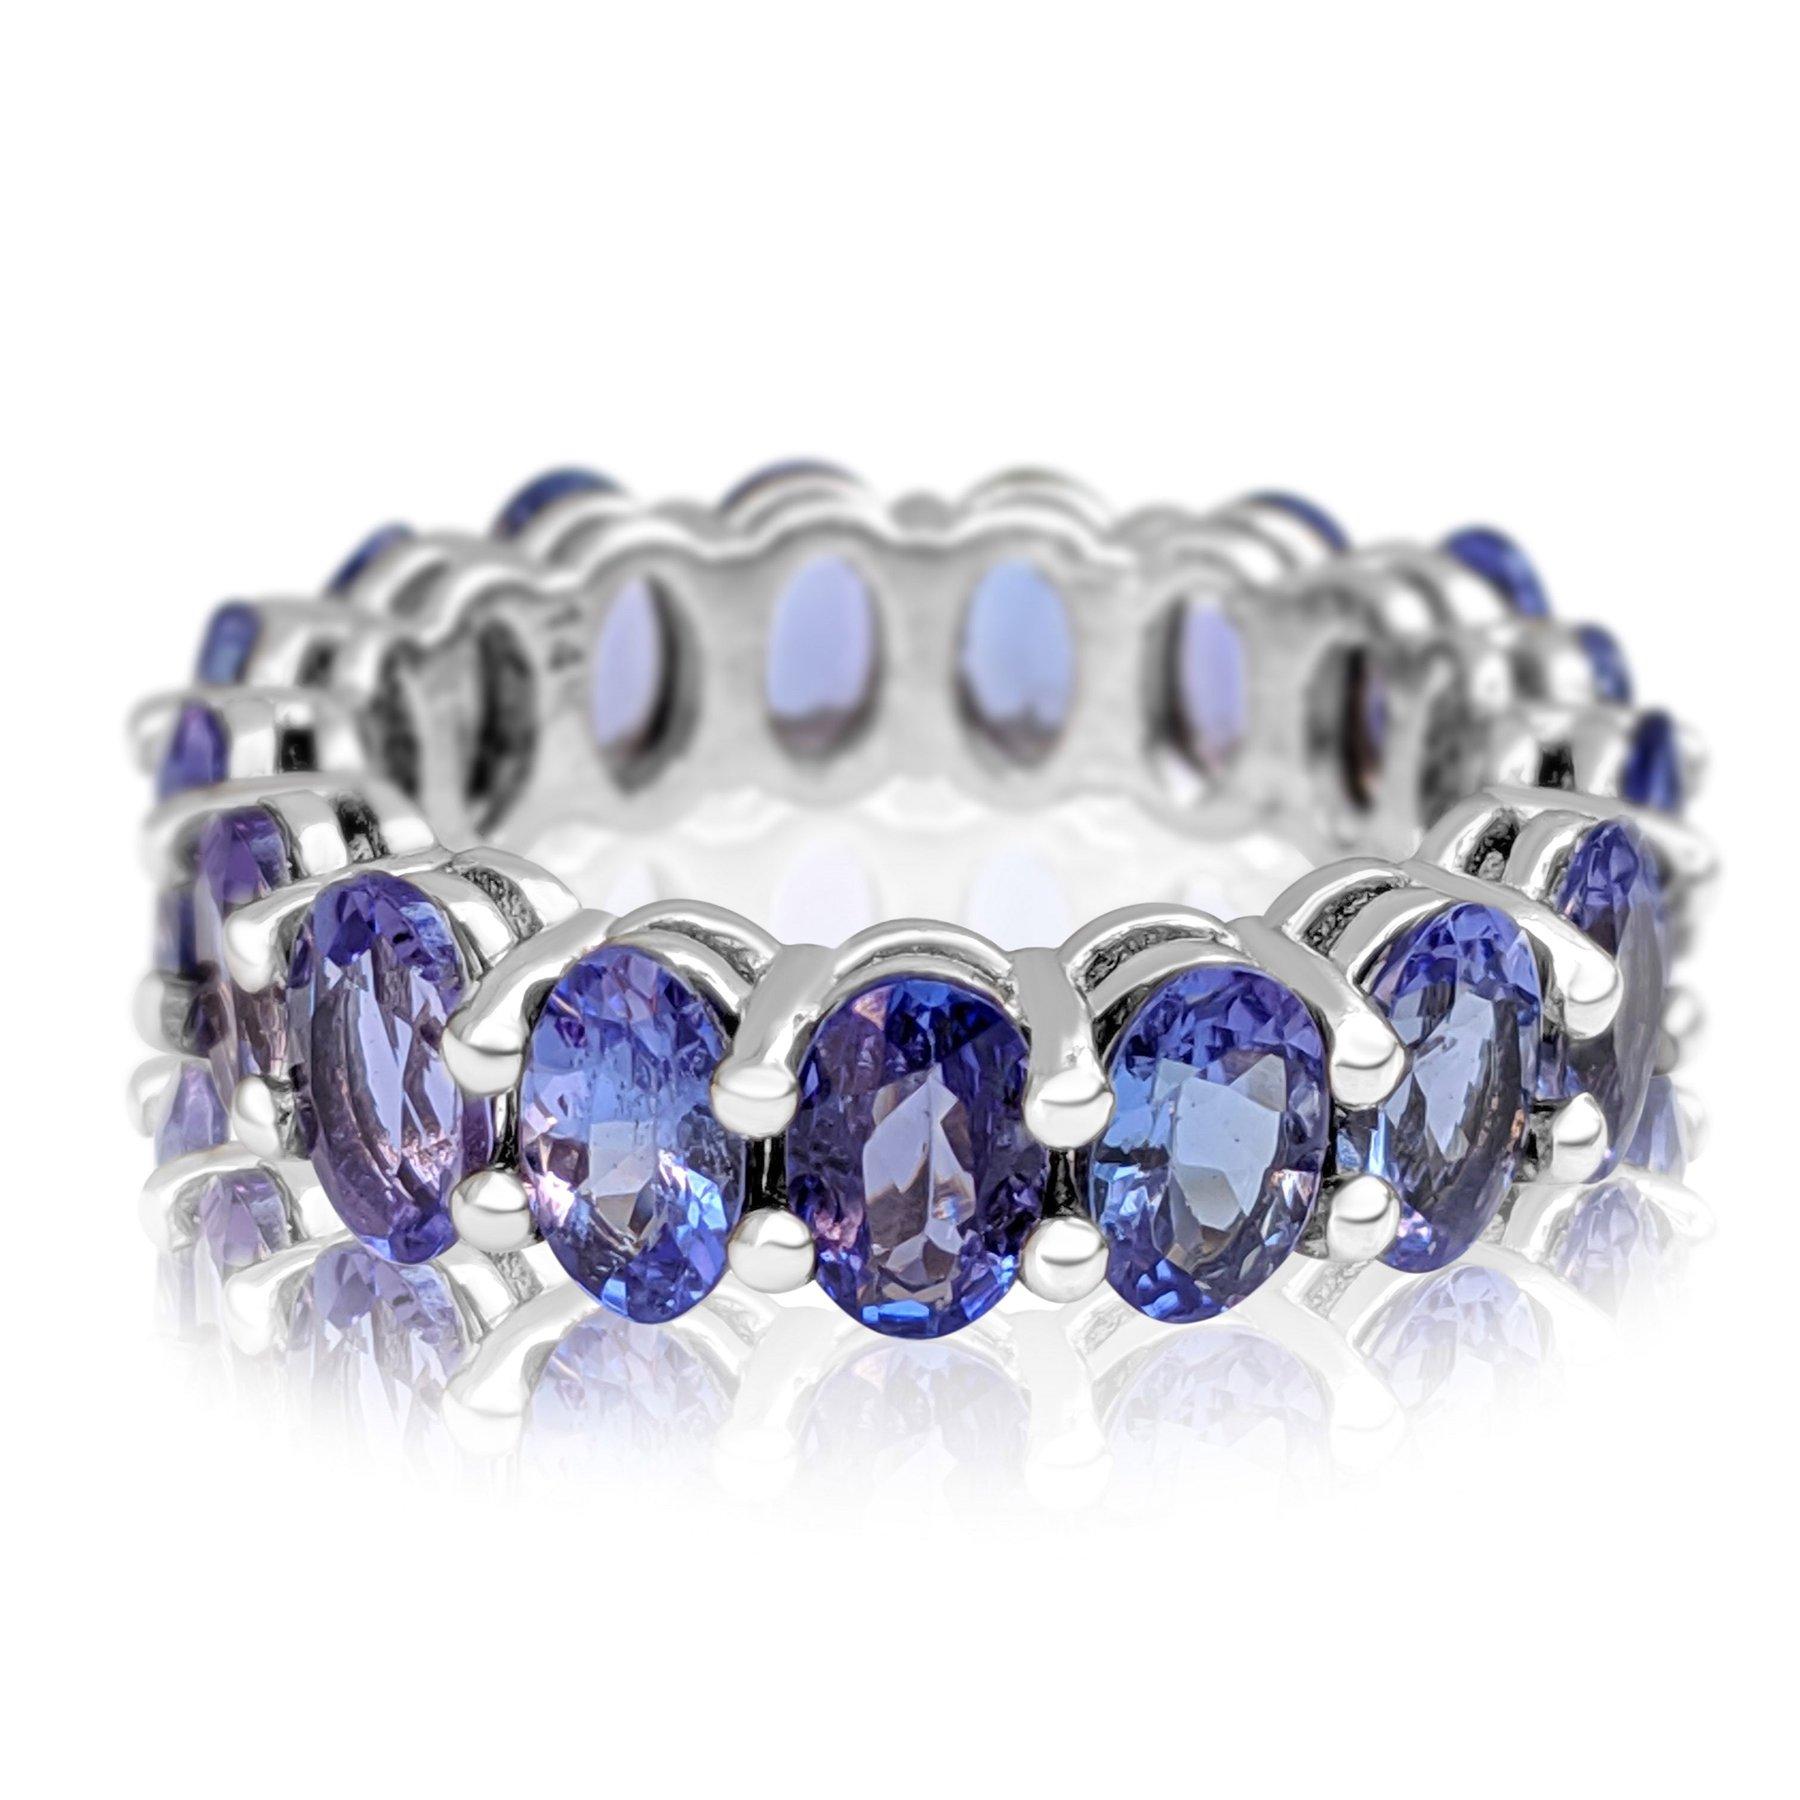 Women's NO RESERVE! 6.37 Carat Tanzanite Eternity Band - 14 kt. White Gold - Ring For Sale